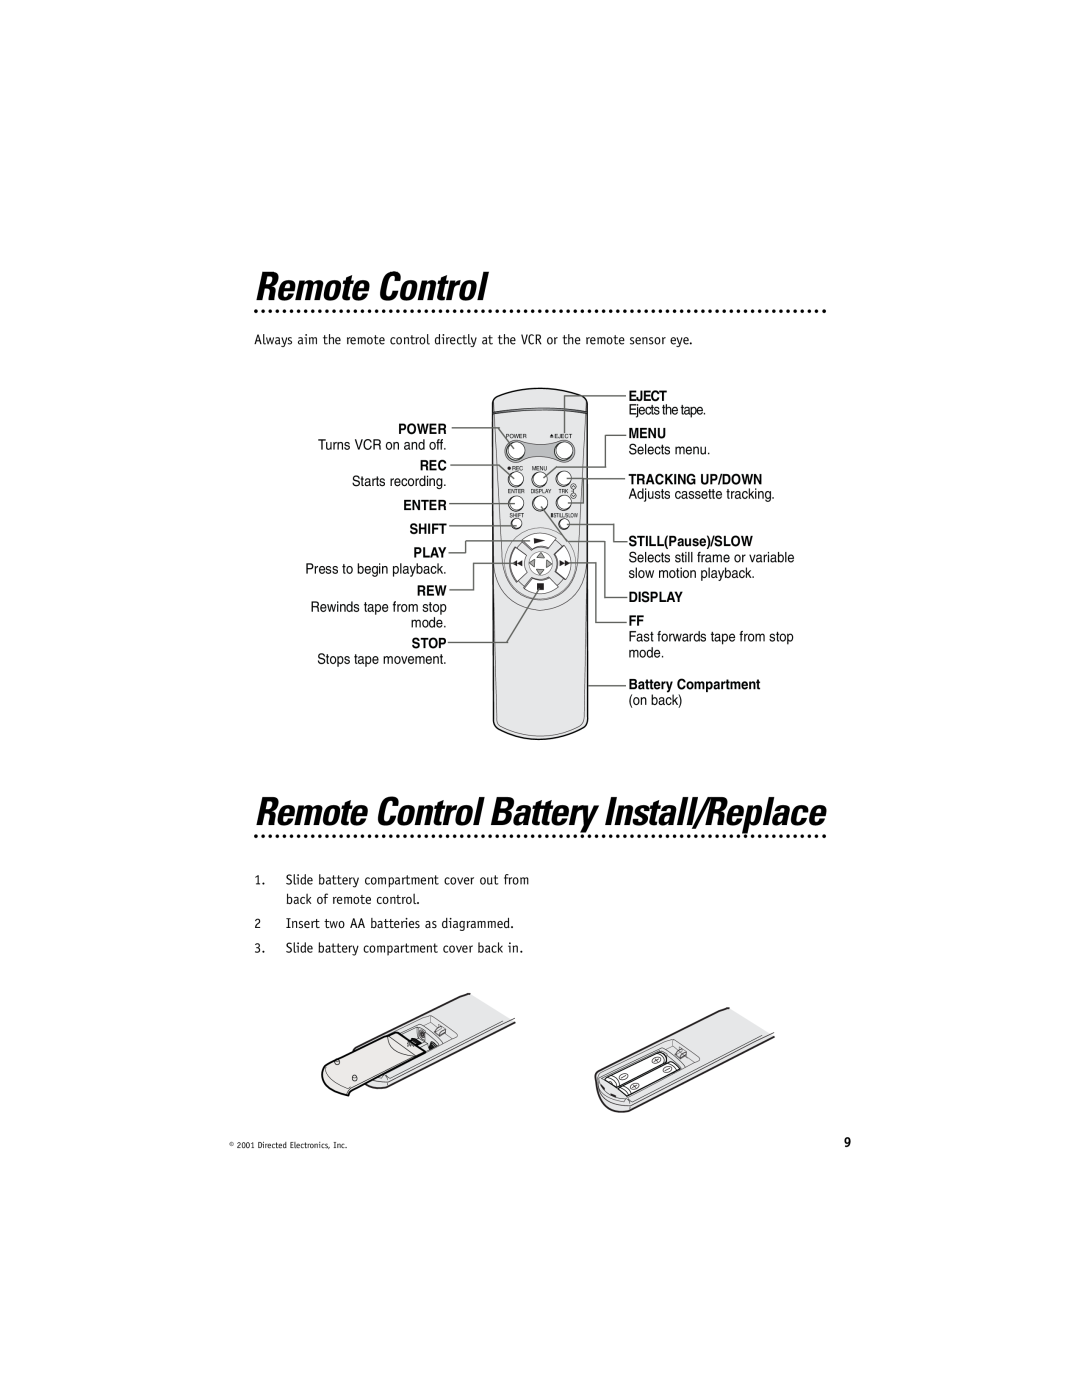 Directed Electronics VC2010 manual Remote Control Battery Install/Replace, Enter Shift, Eject, Menu, Display Ff 